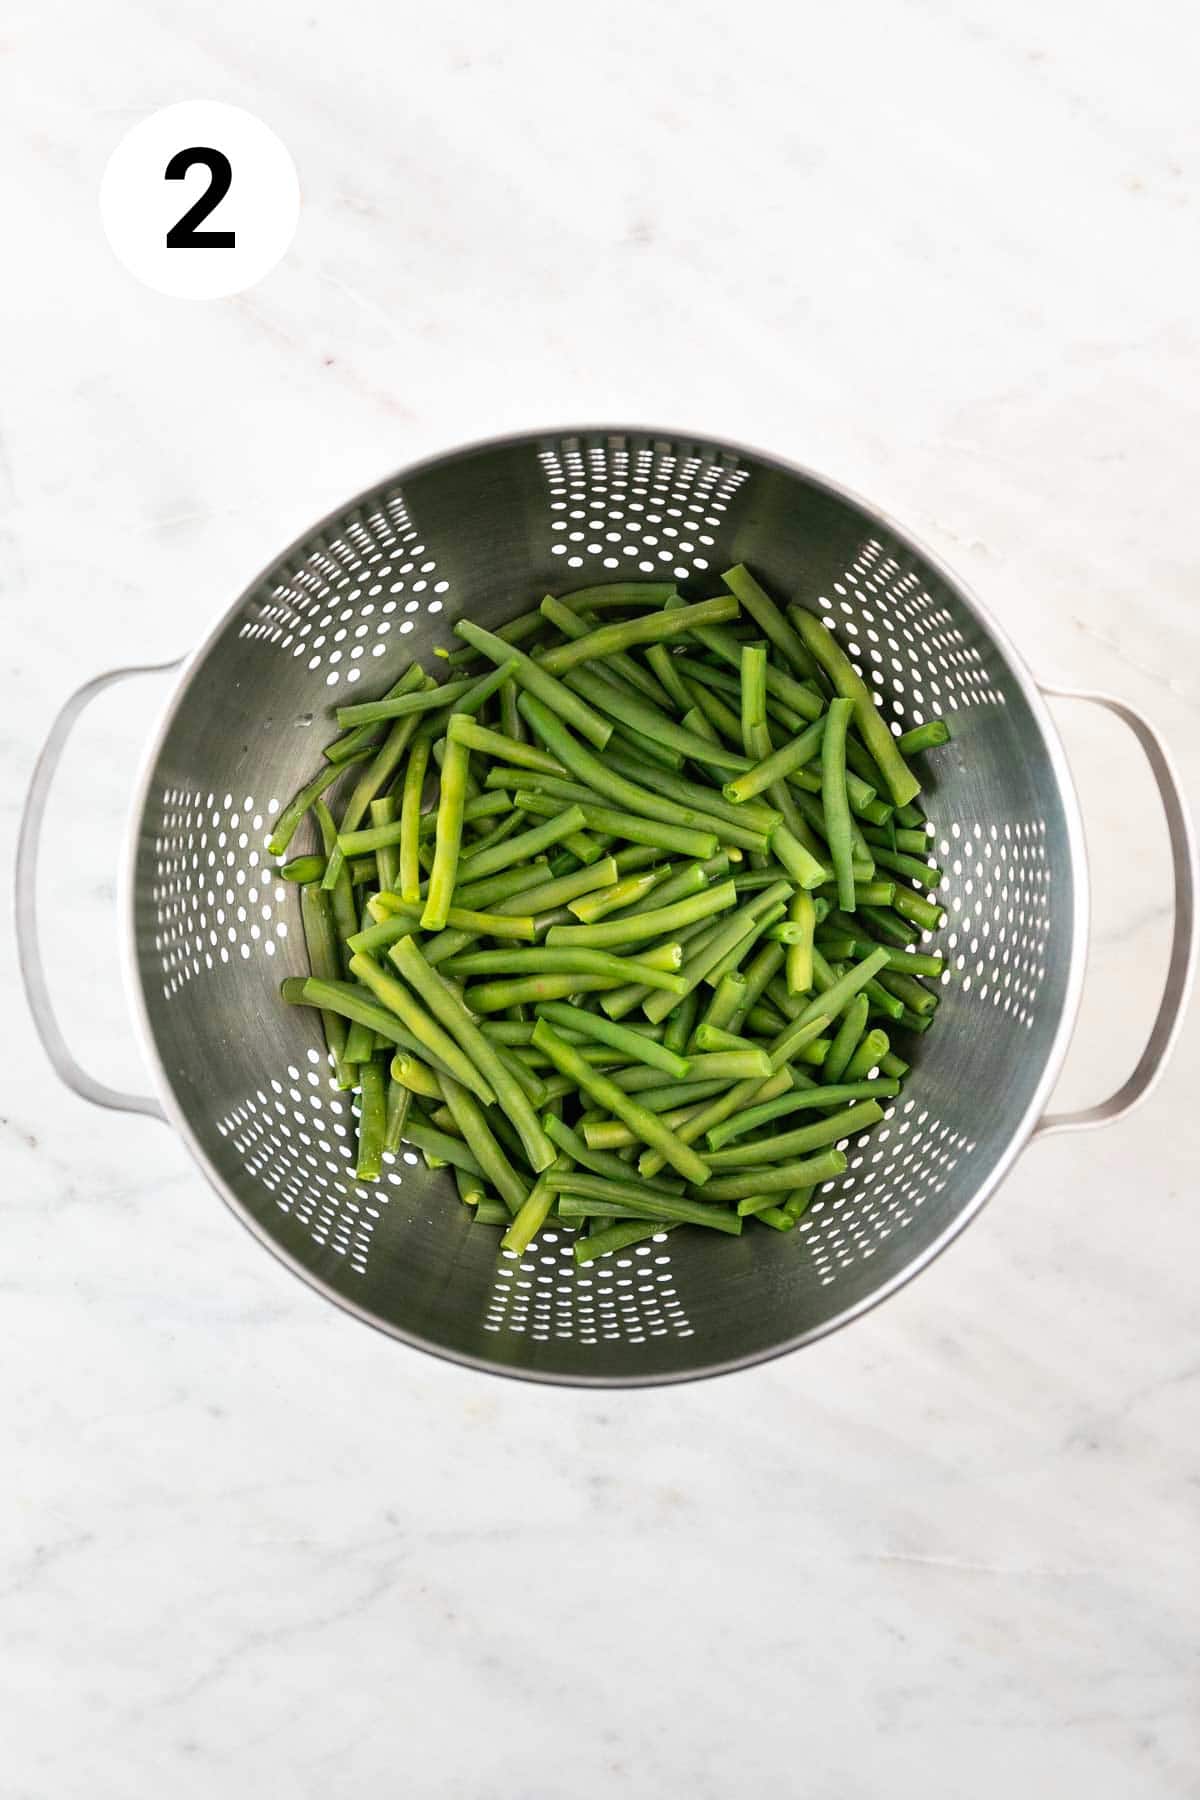 Blanched green beans in a colander.